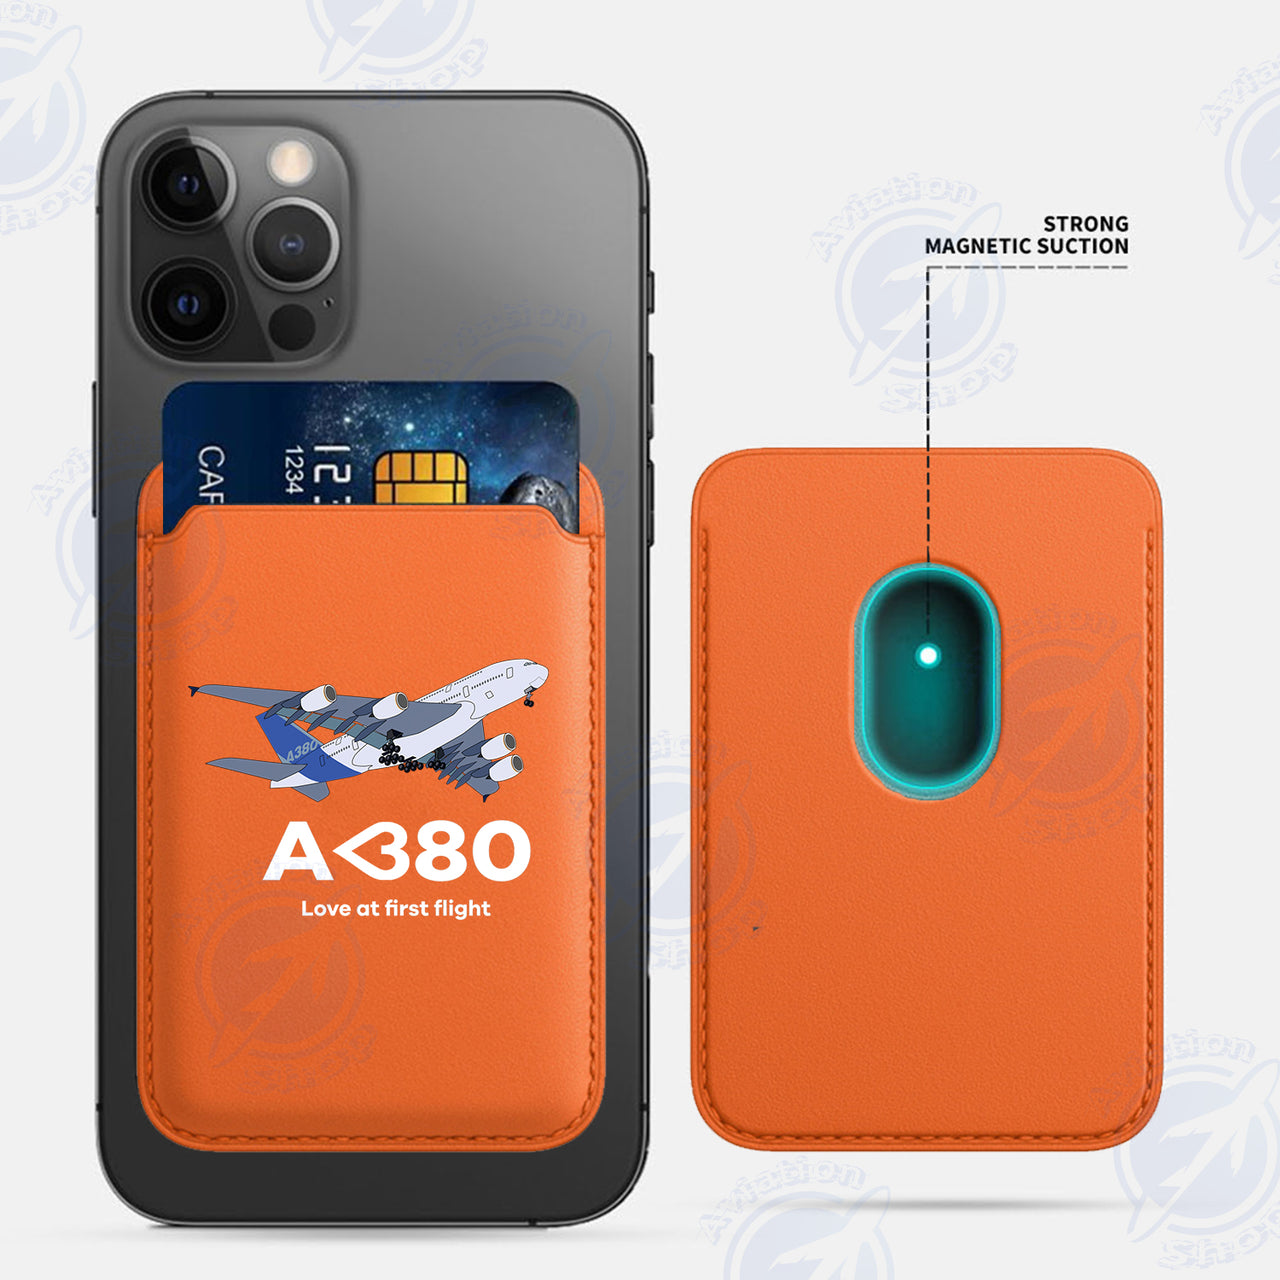 Airbus A380 Love at first flight iPhone Cases Magnetic Card Wallet